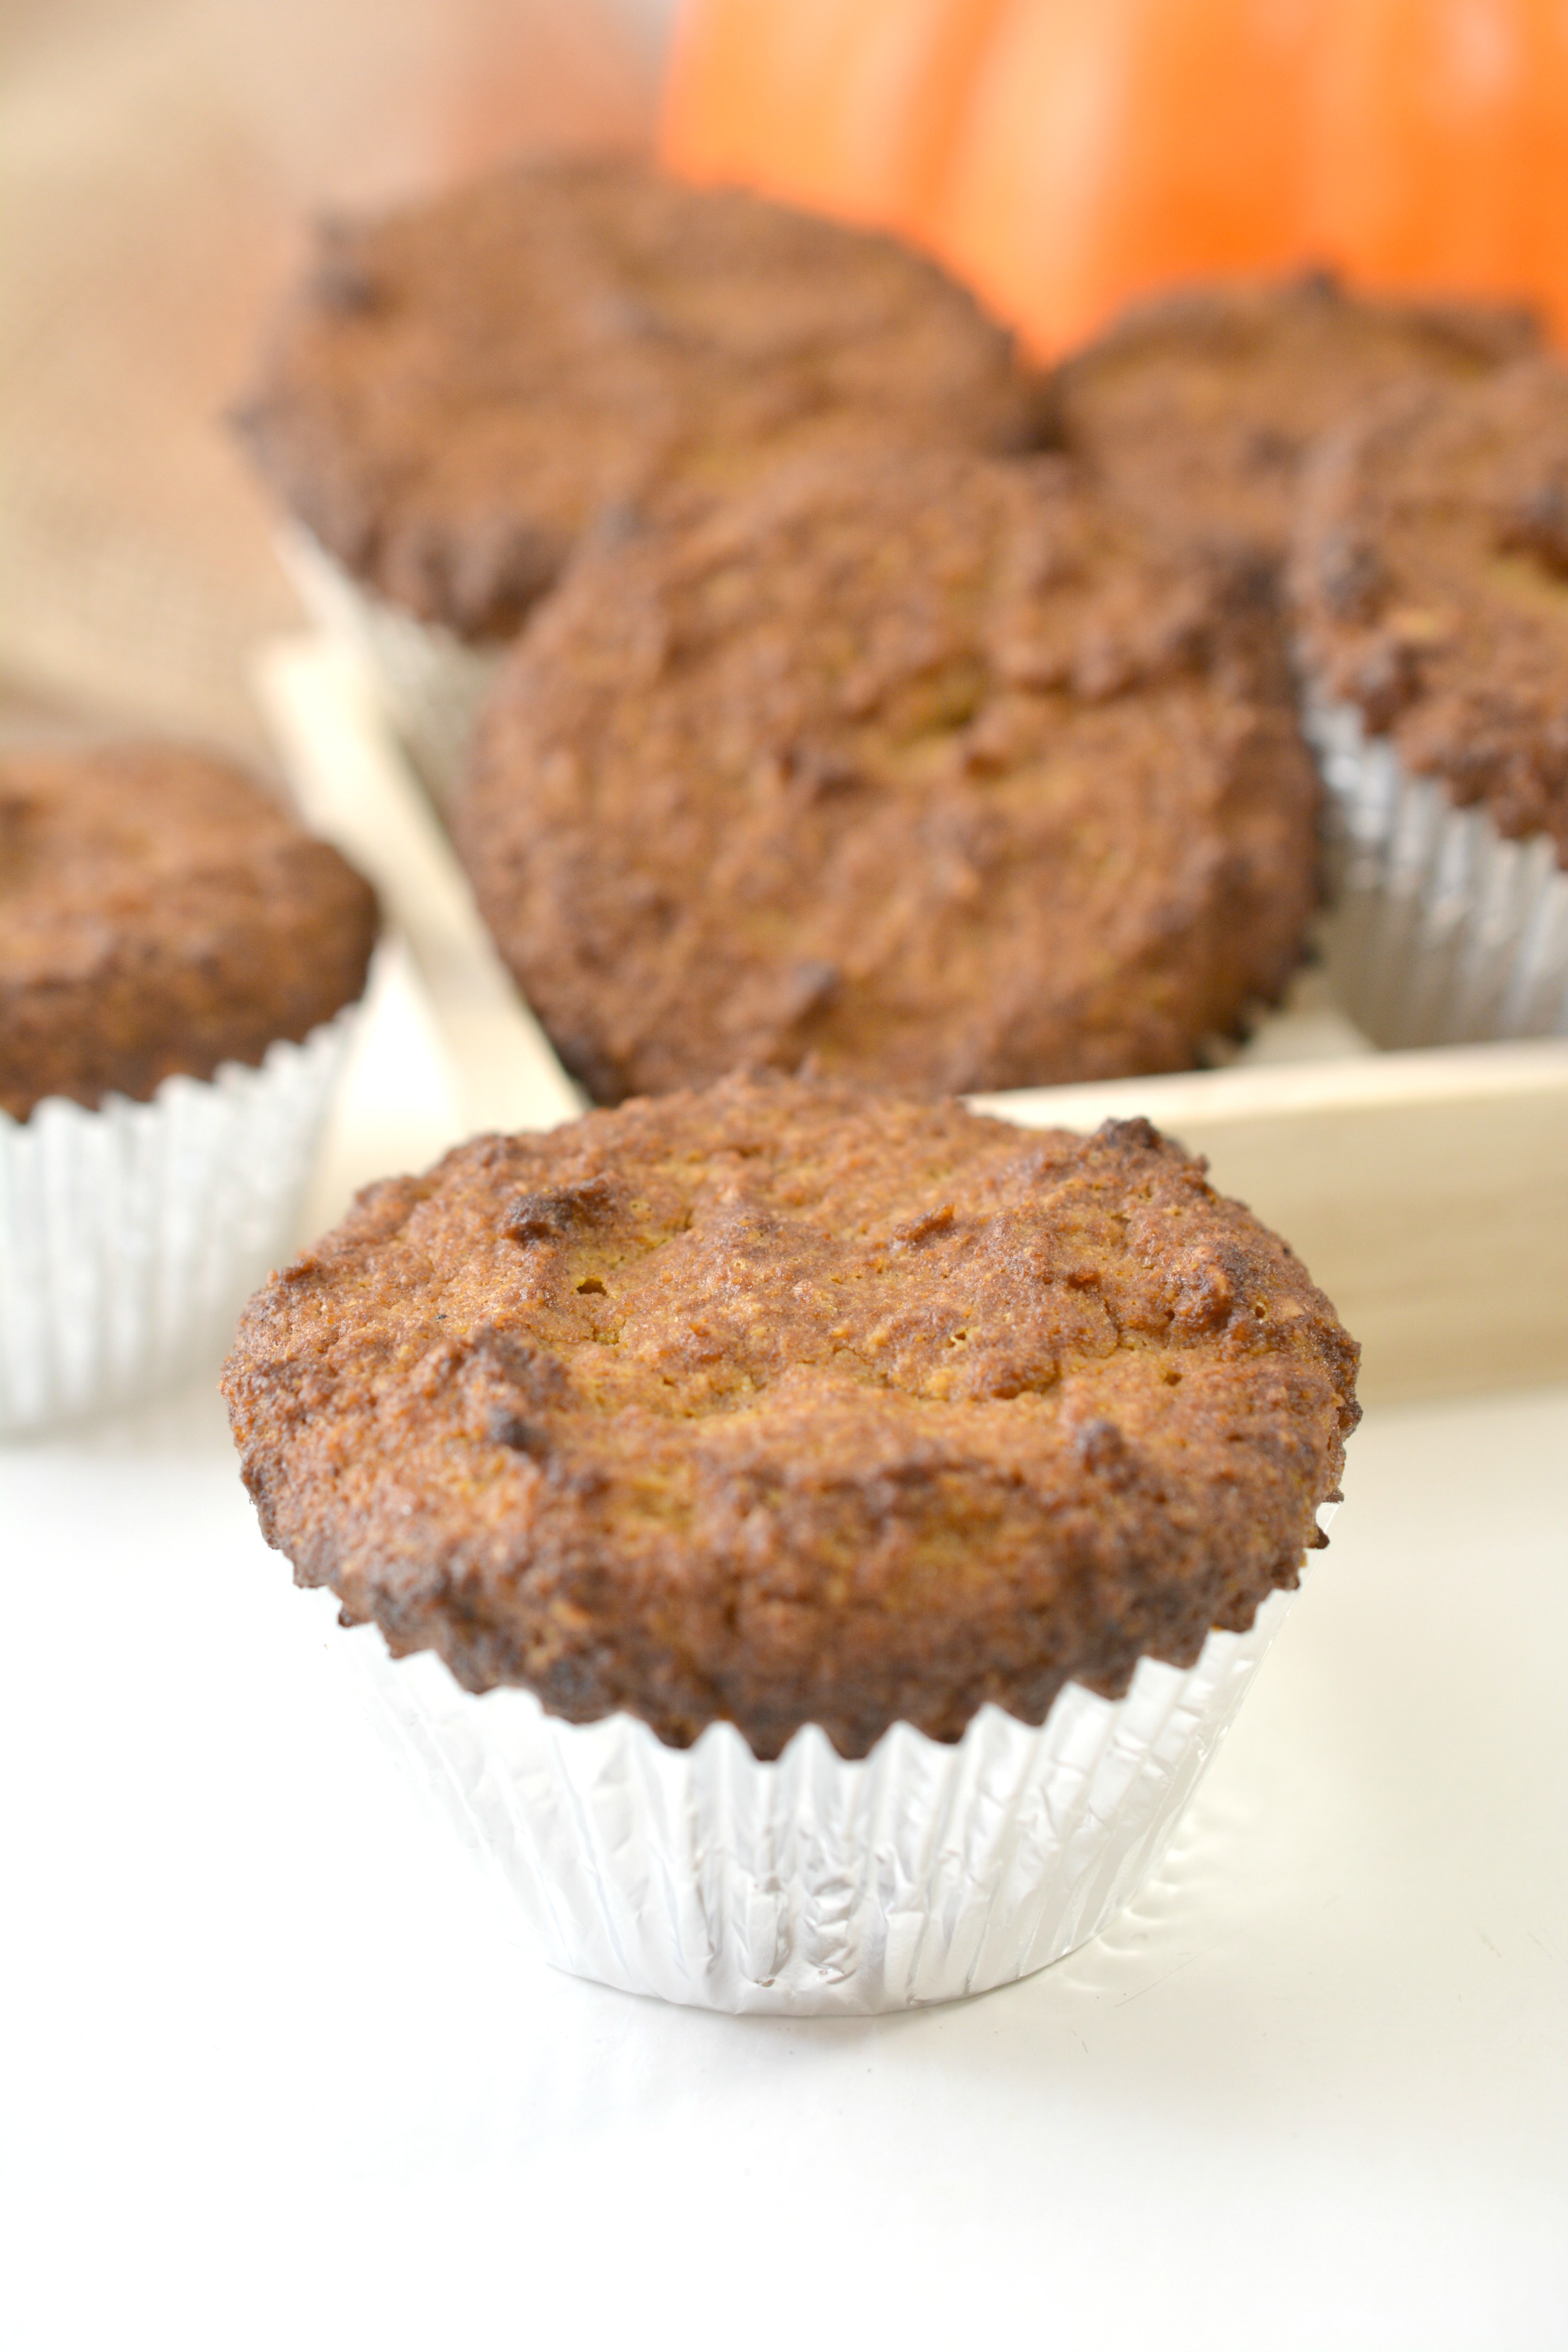 Looking for a great gift in a jar? This Keto Pumpkin Spice Muffin Mix is a great idea. Even people who are not on the Keto diet will love how easy these muffins are to make.